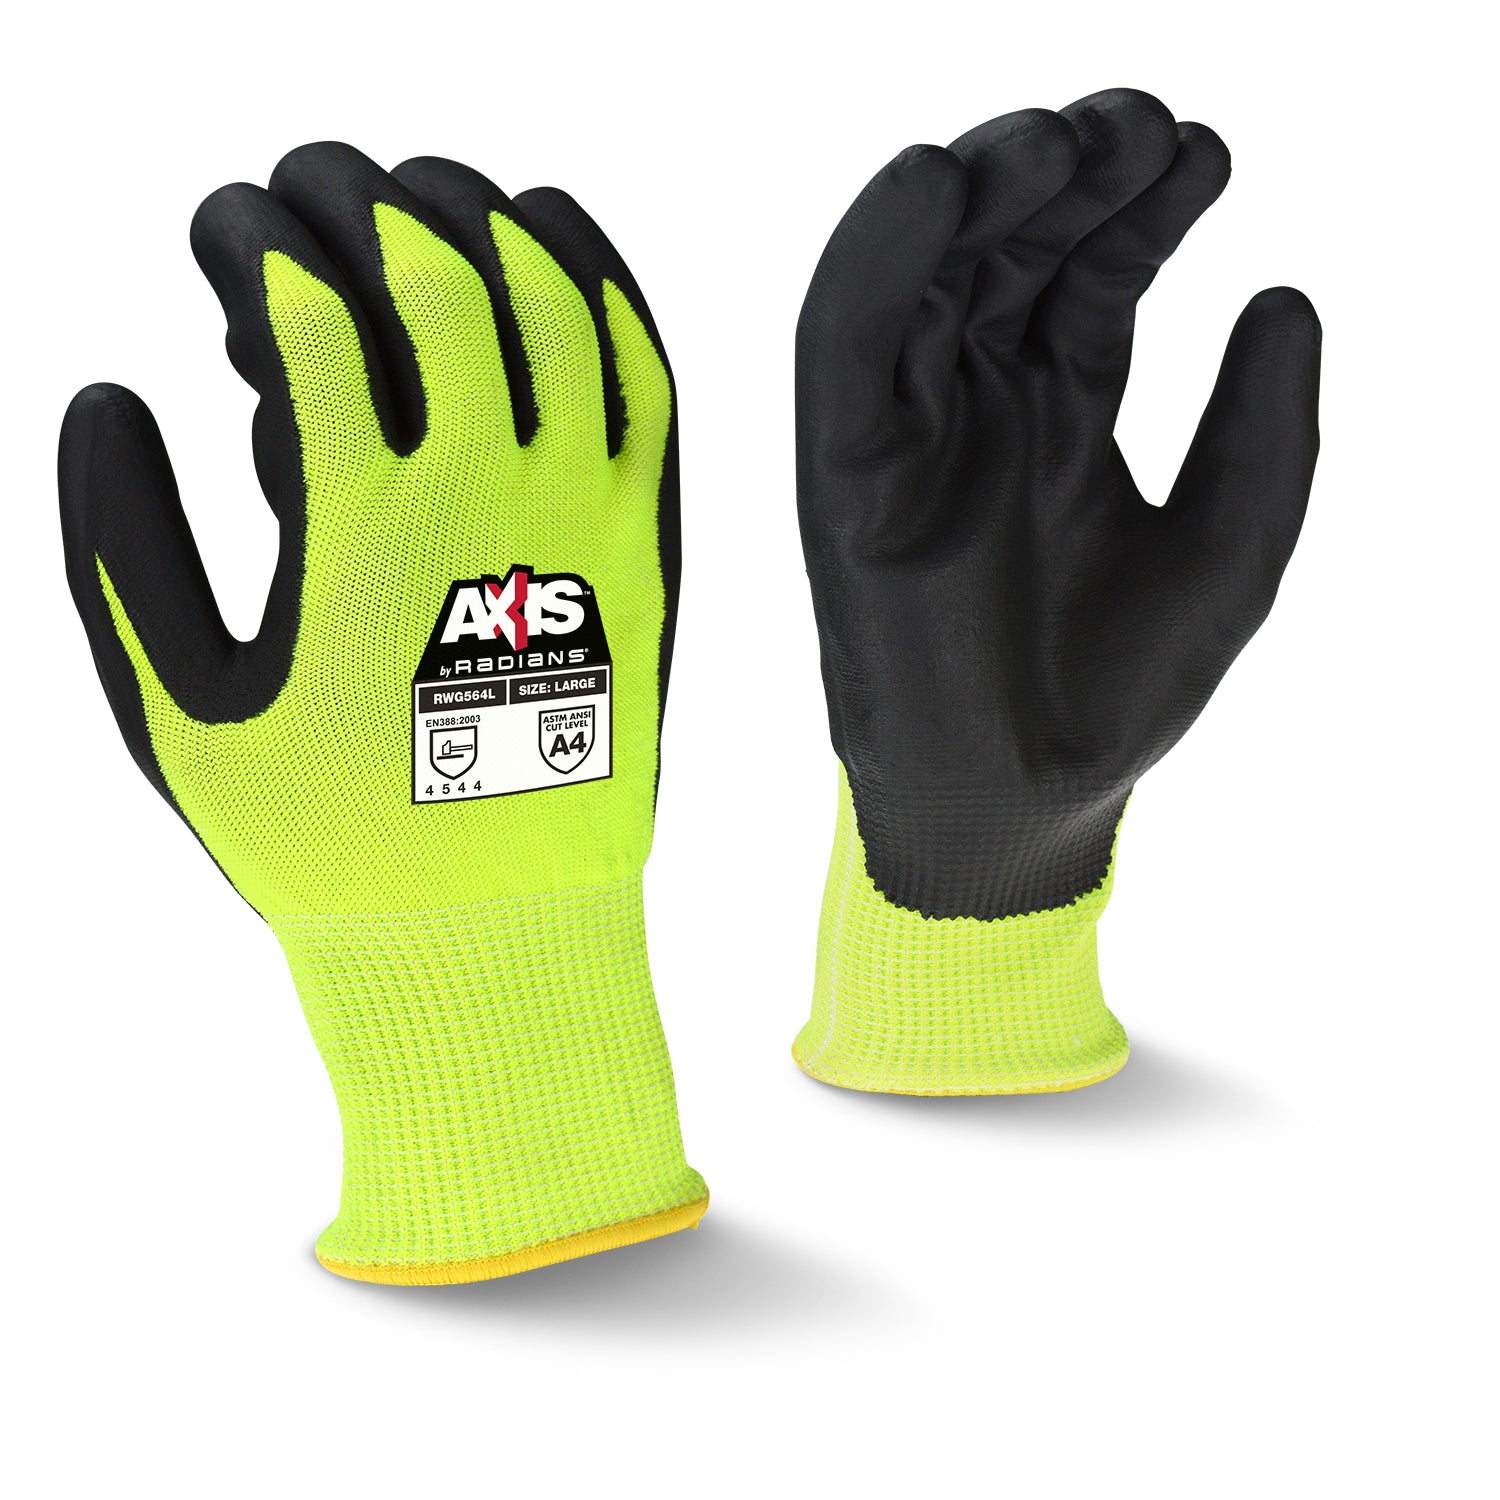 Radians RWG564 AXIS™ Cut Protection Level A4 High Visibility Work Glove-eSafety Supplies, Inc